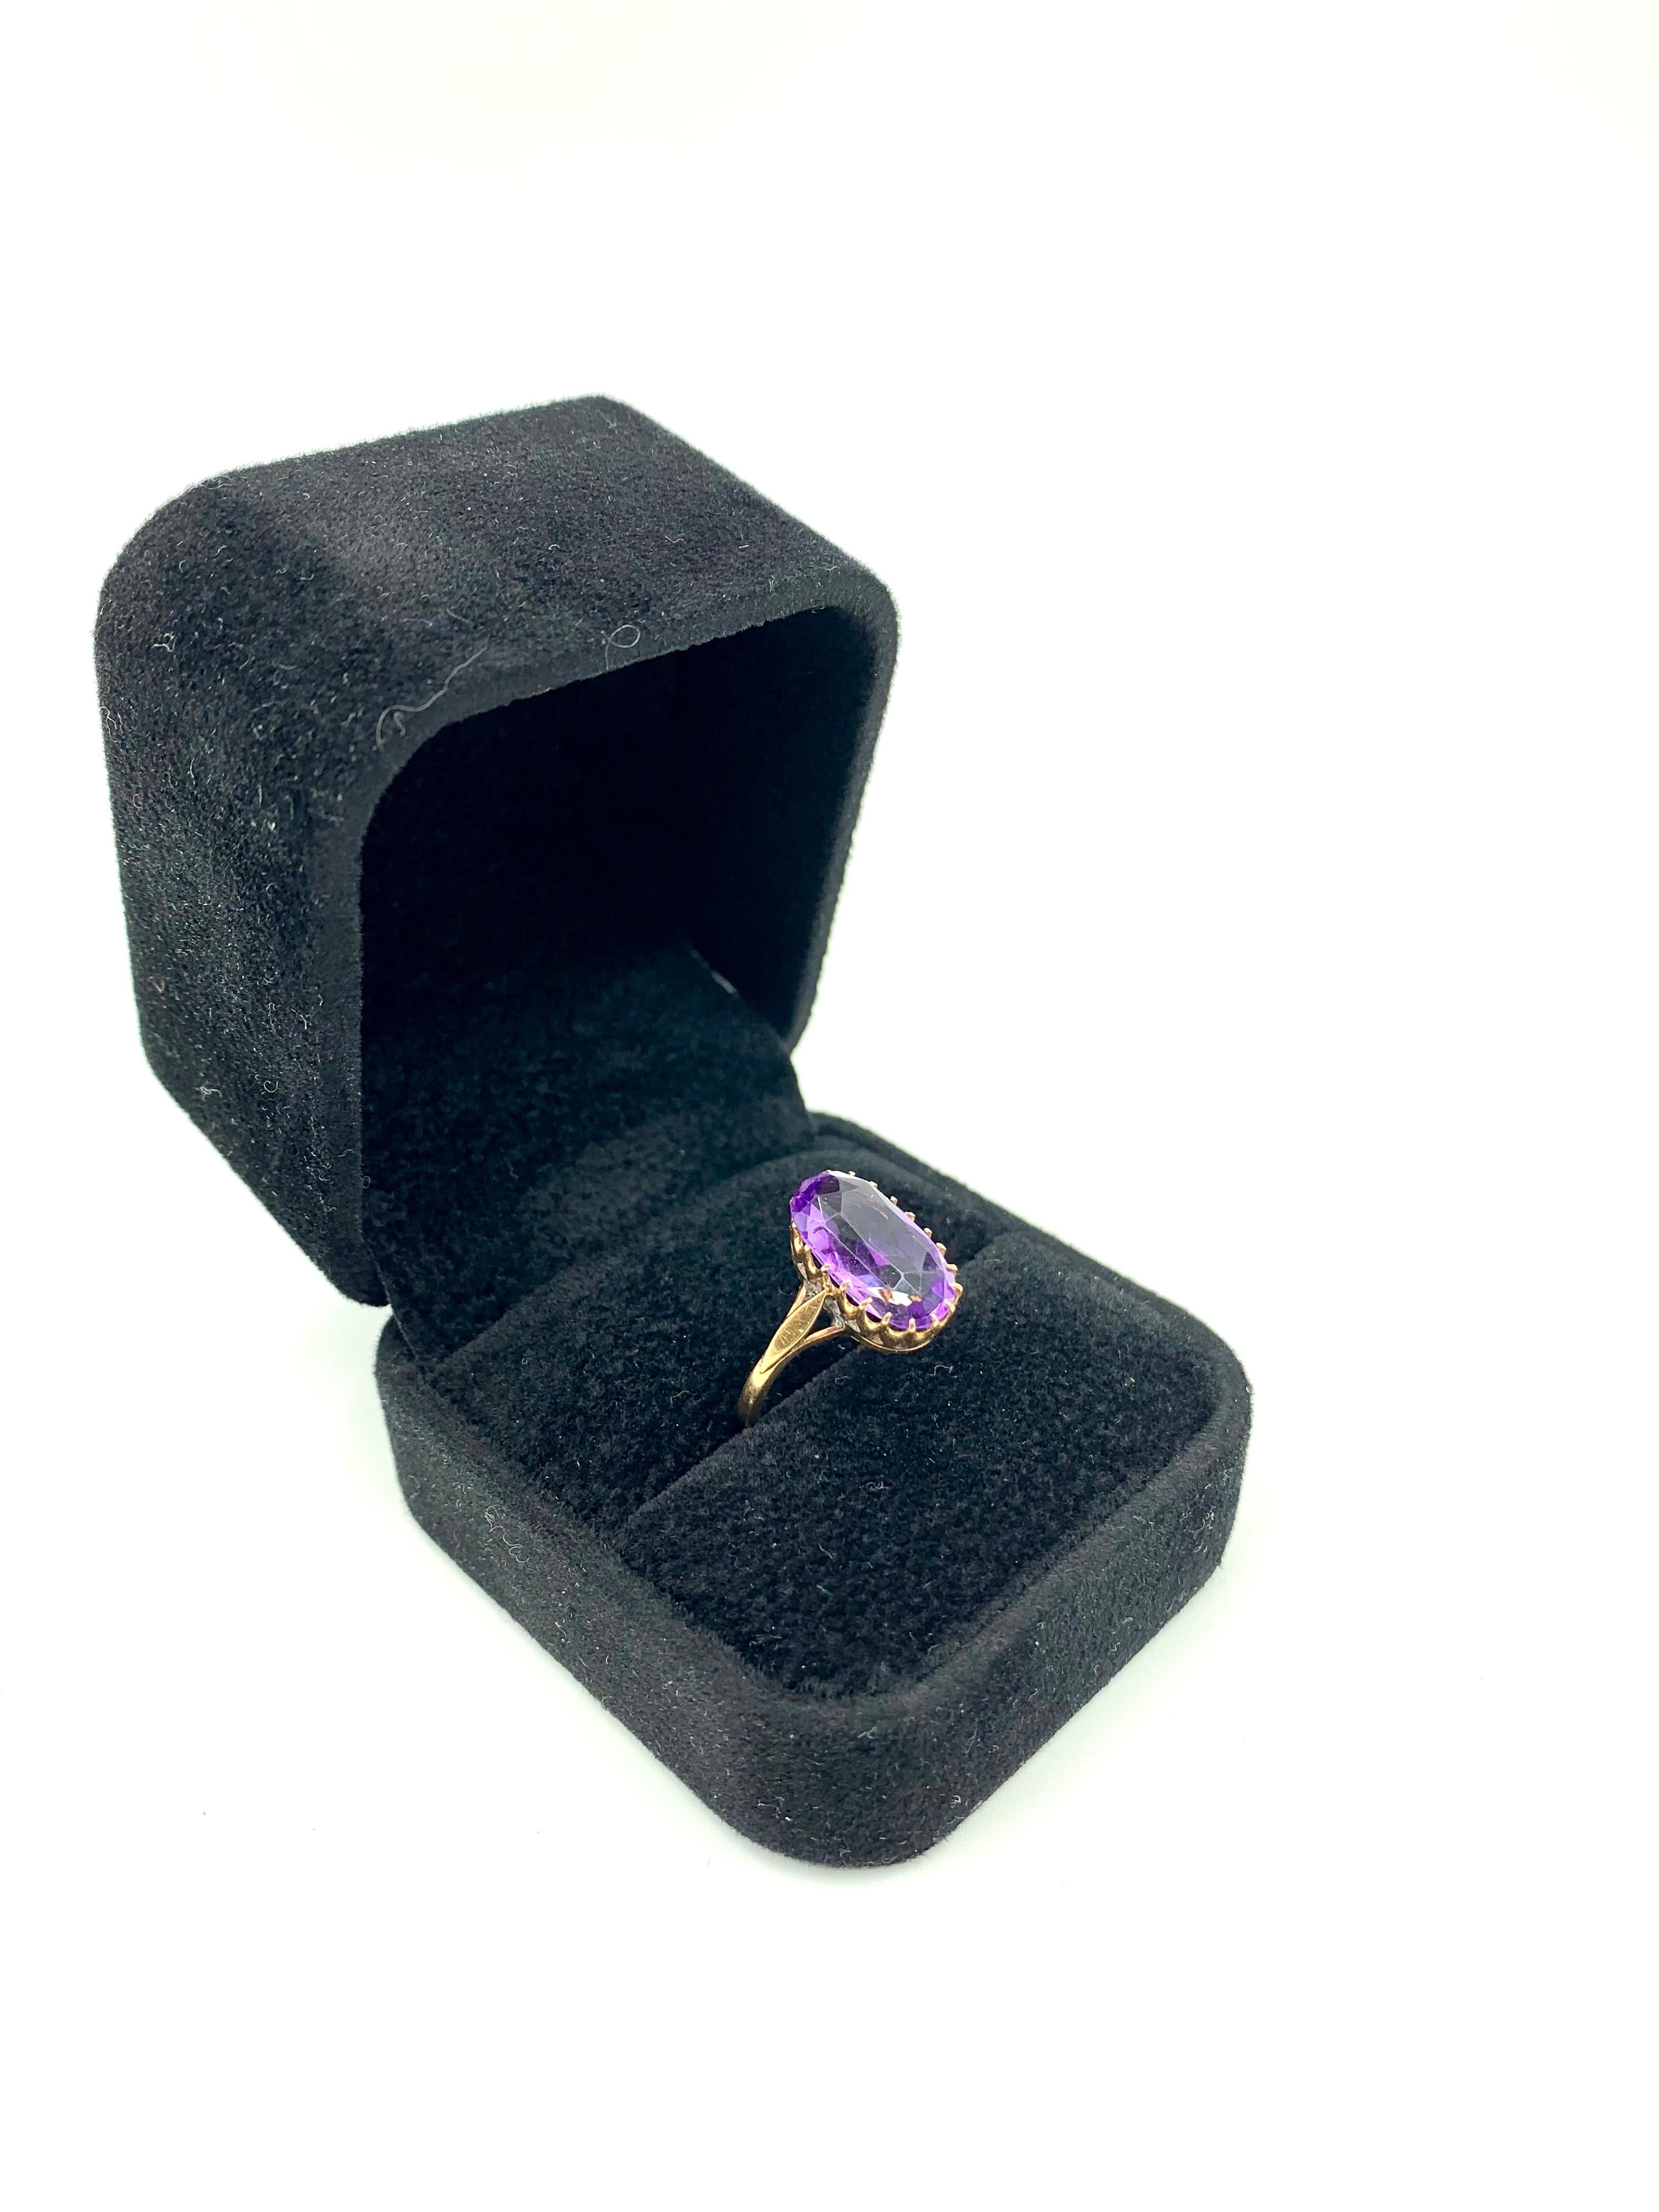 Women's or Men's Antique Early Victorian 14 Karat Gold Yellow and Amethyst Oval Ring 19th Century